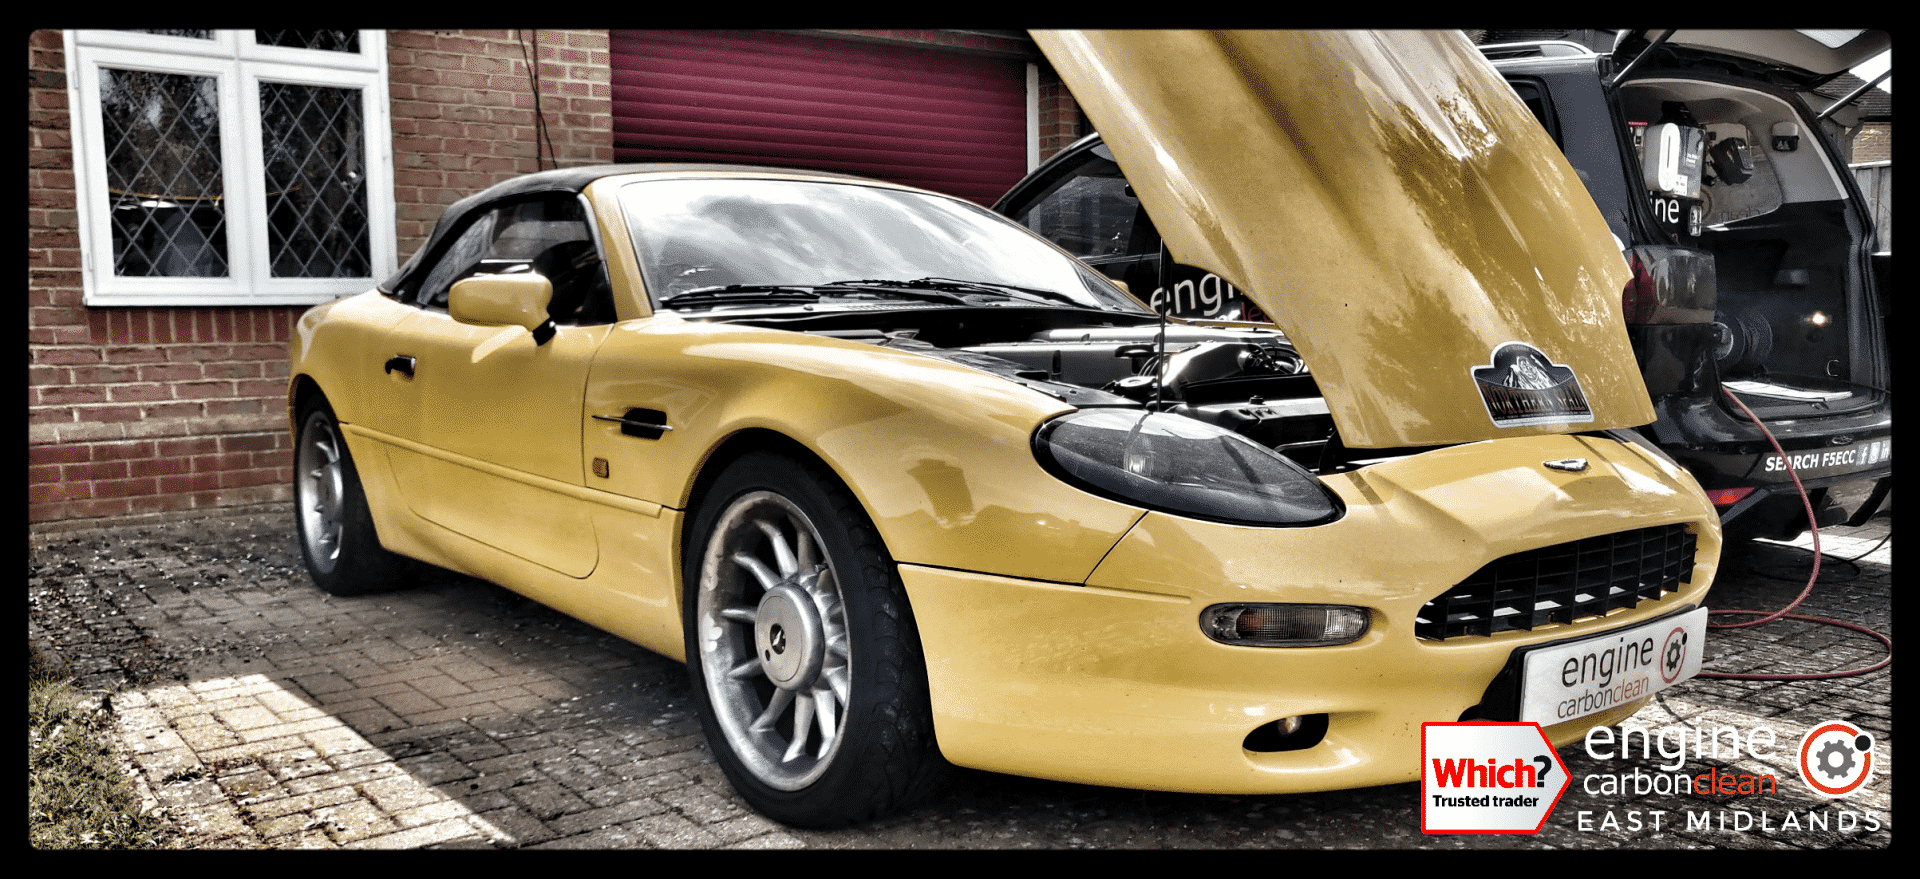 MOT Pass for this Aston Martin DB7 after an Engine Carbon Clean